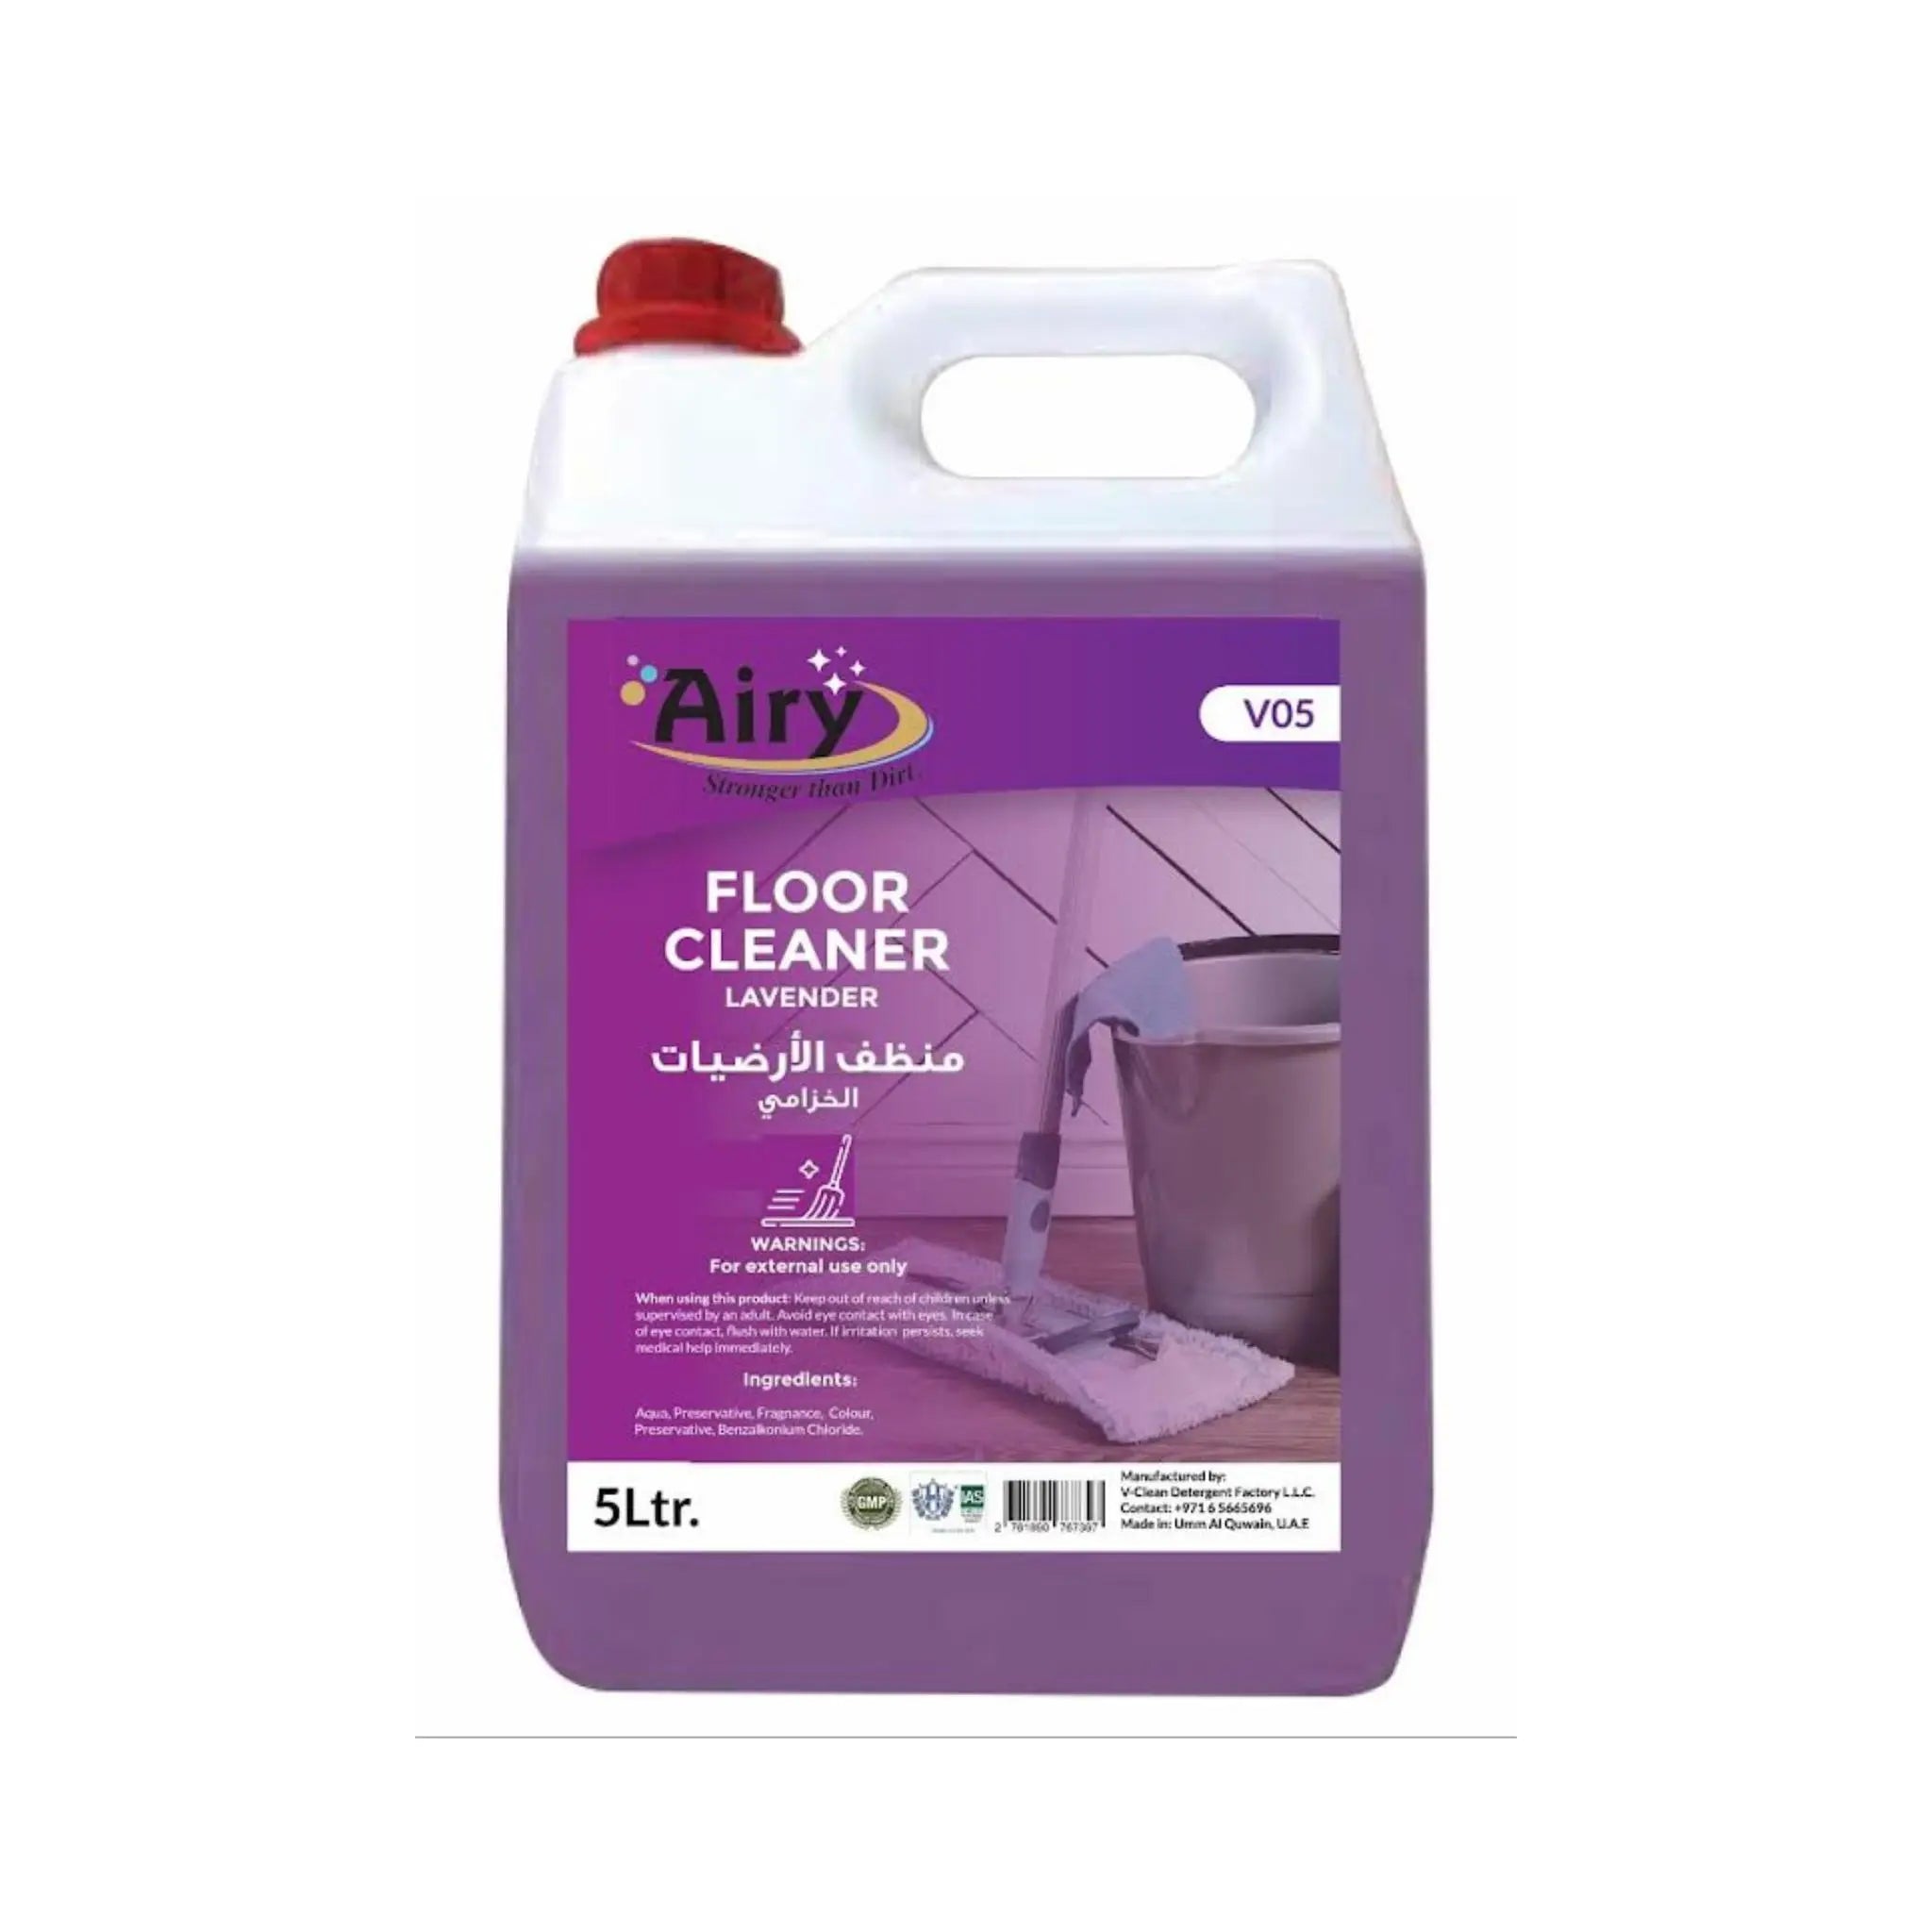 AIRY FLOOR CLEANER LEVENDER 5L - Pack of 4 Marino.AE